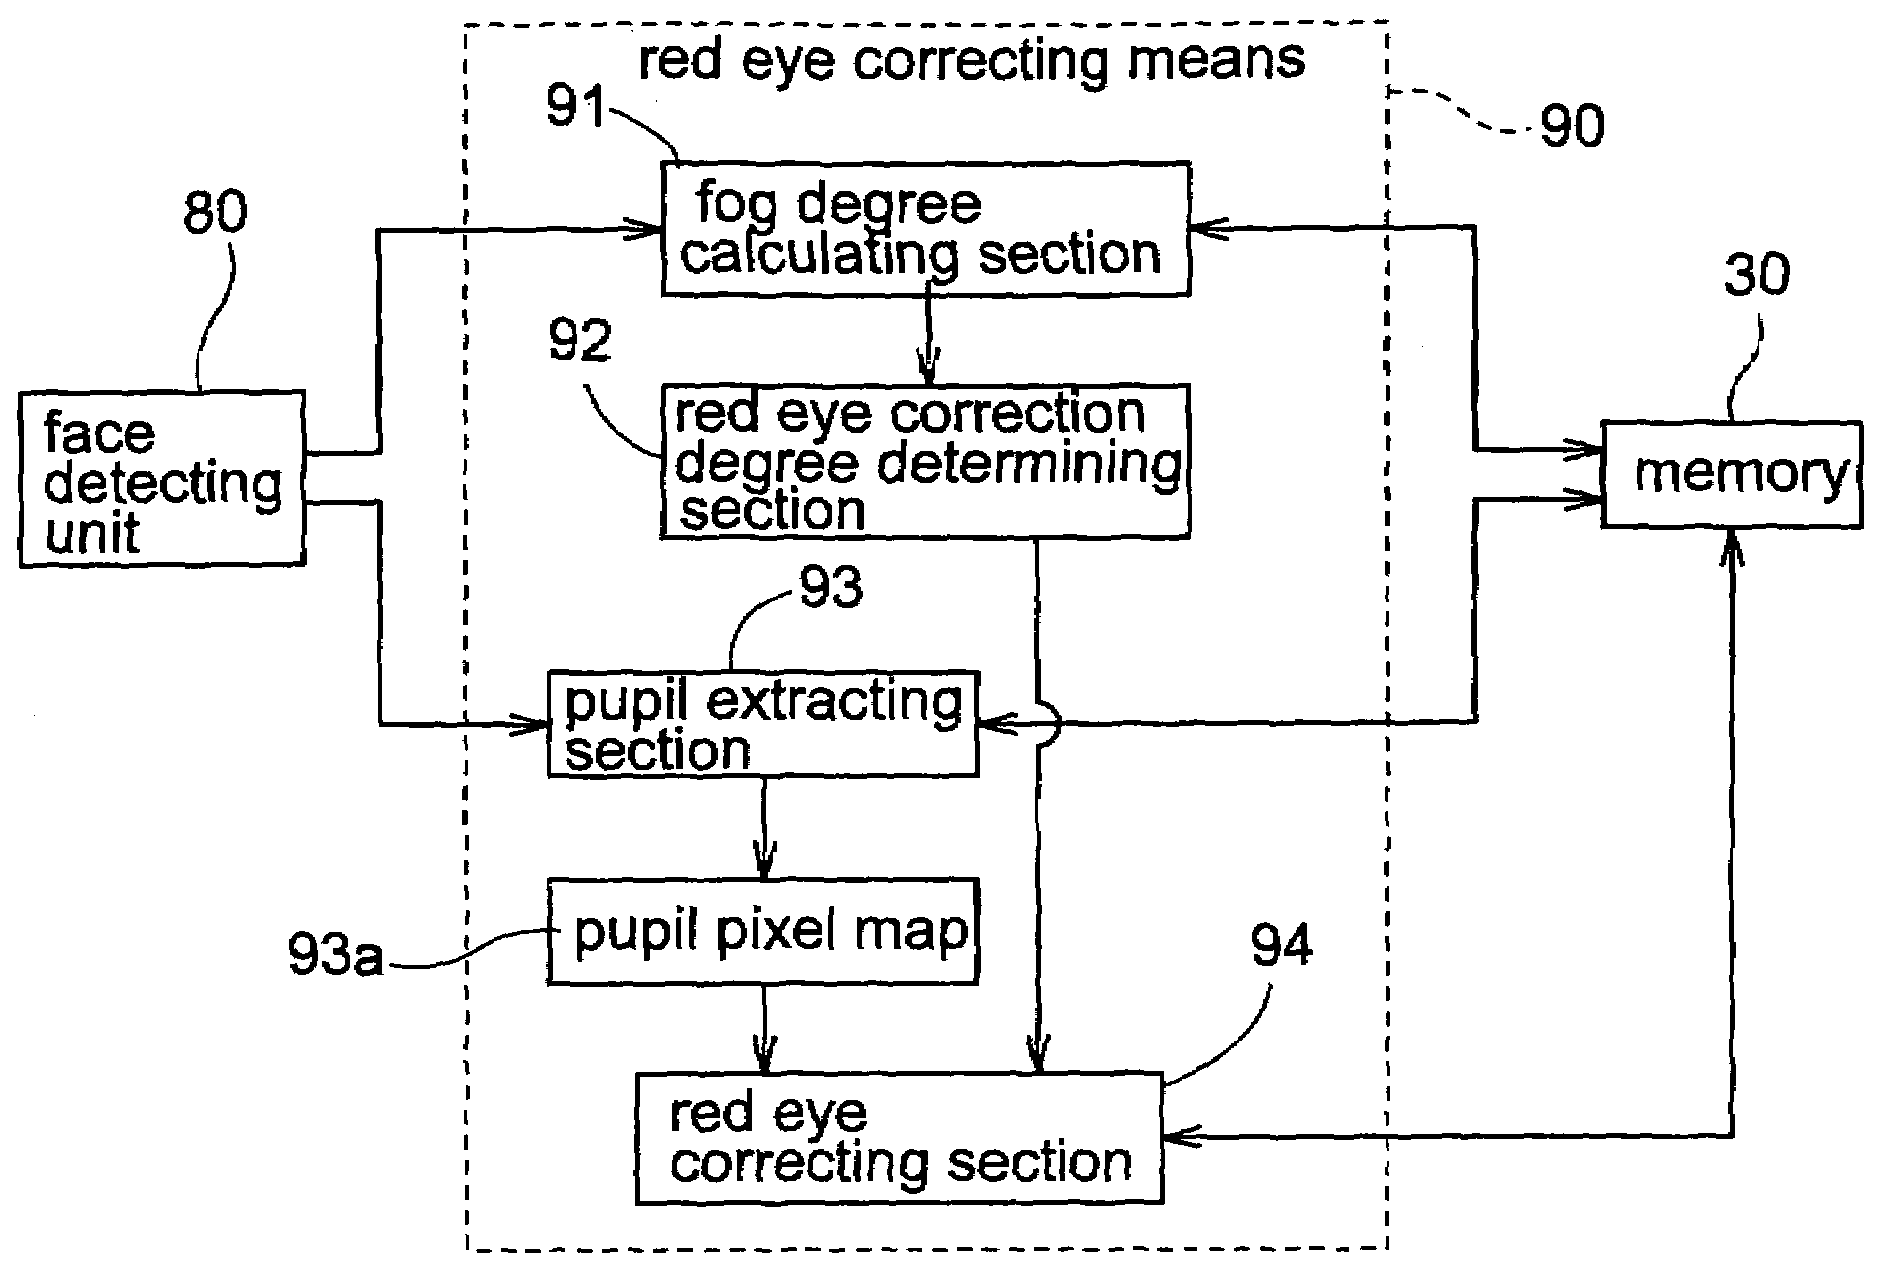 Image processing method and apparatus for red eye correction